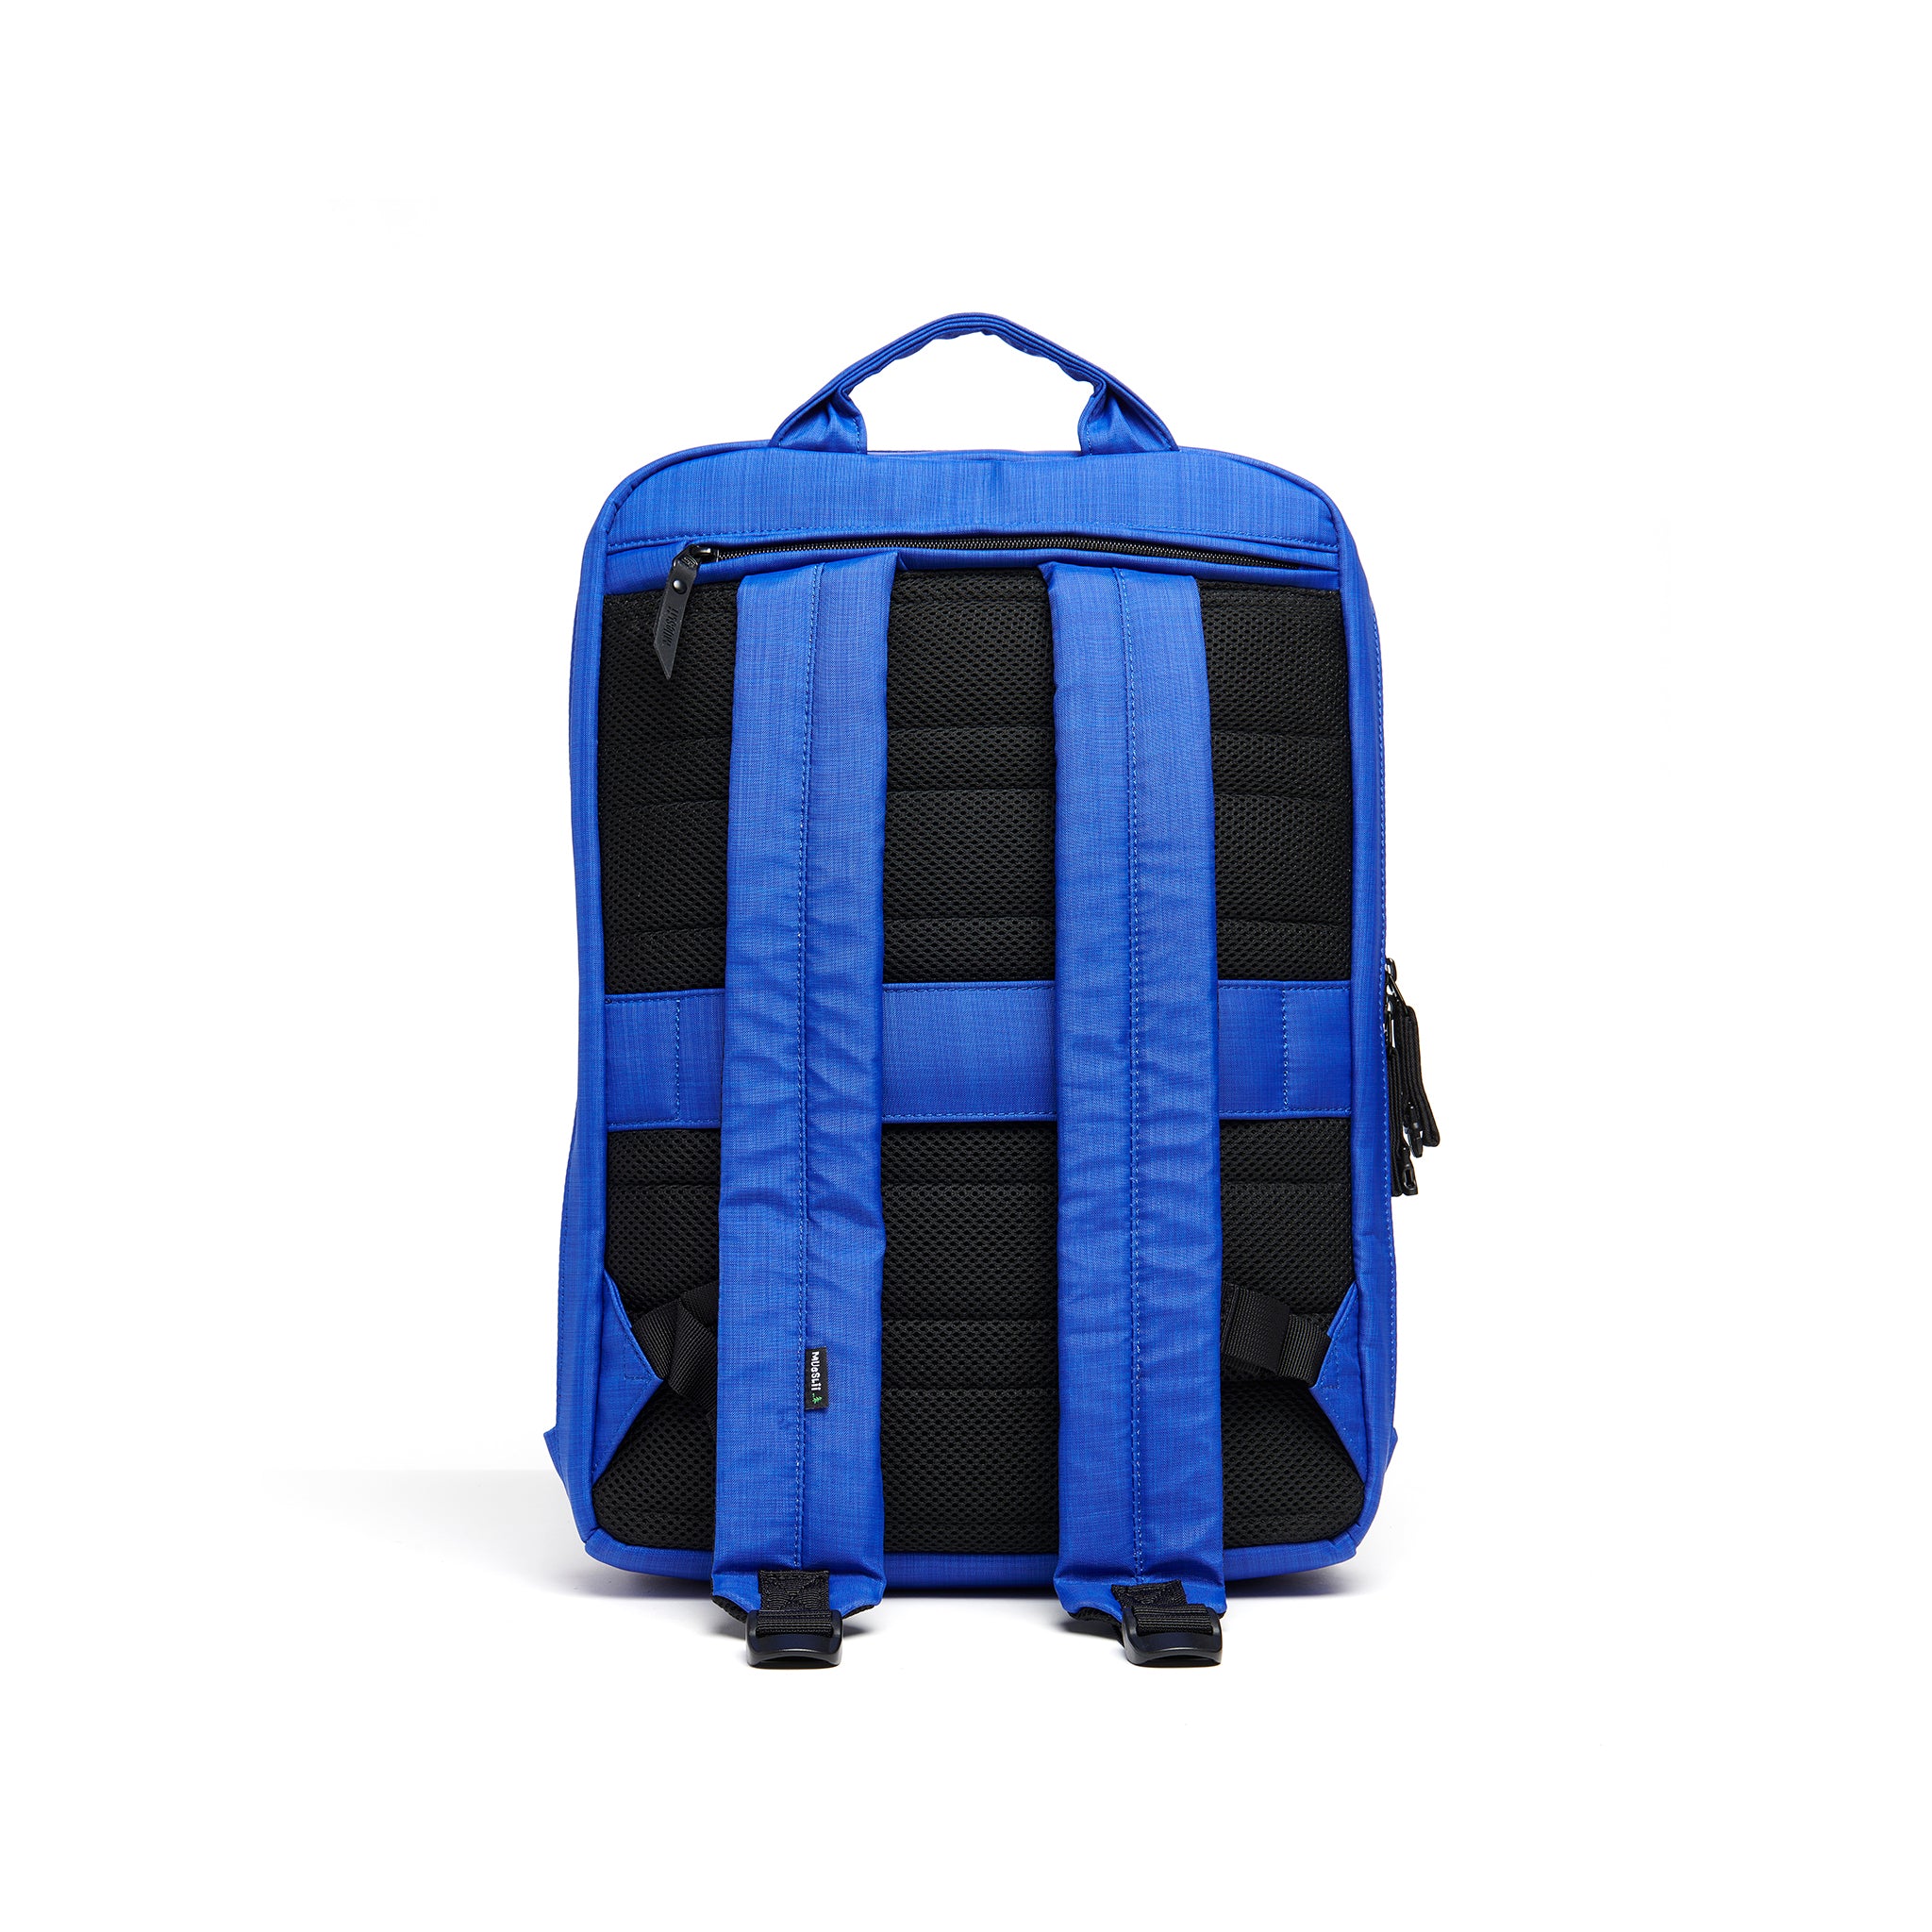 Mueslii daily backpack, made of  water resistant canvas nylon, with a laptop compartment, color summer blue, back view.